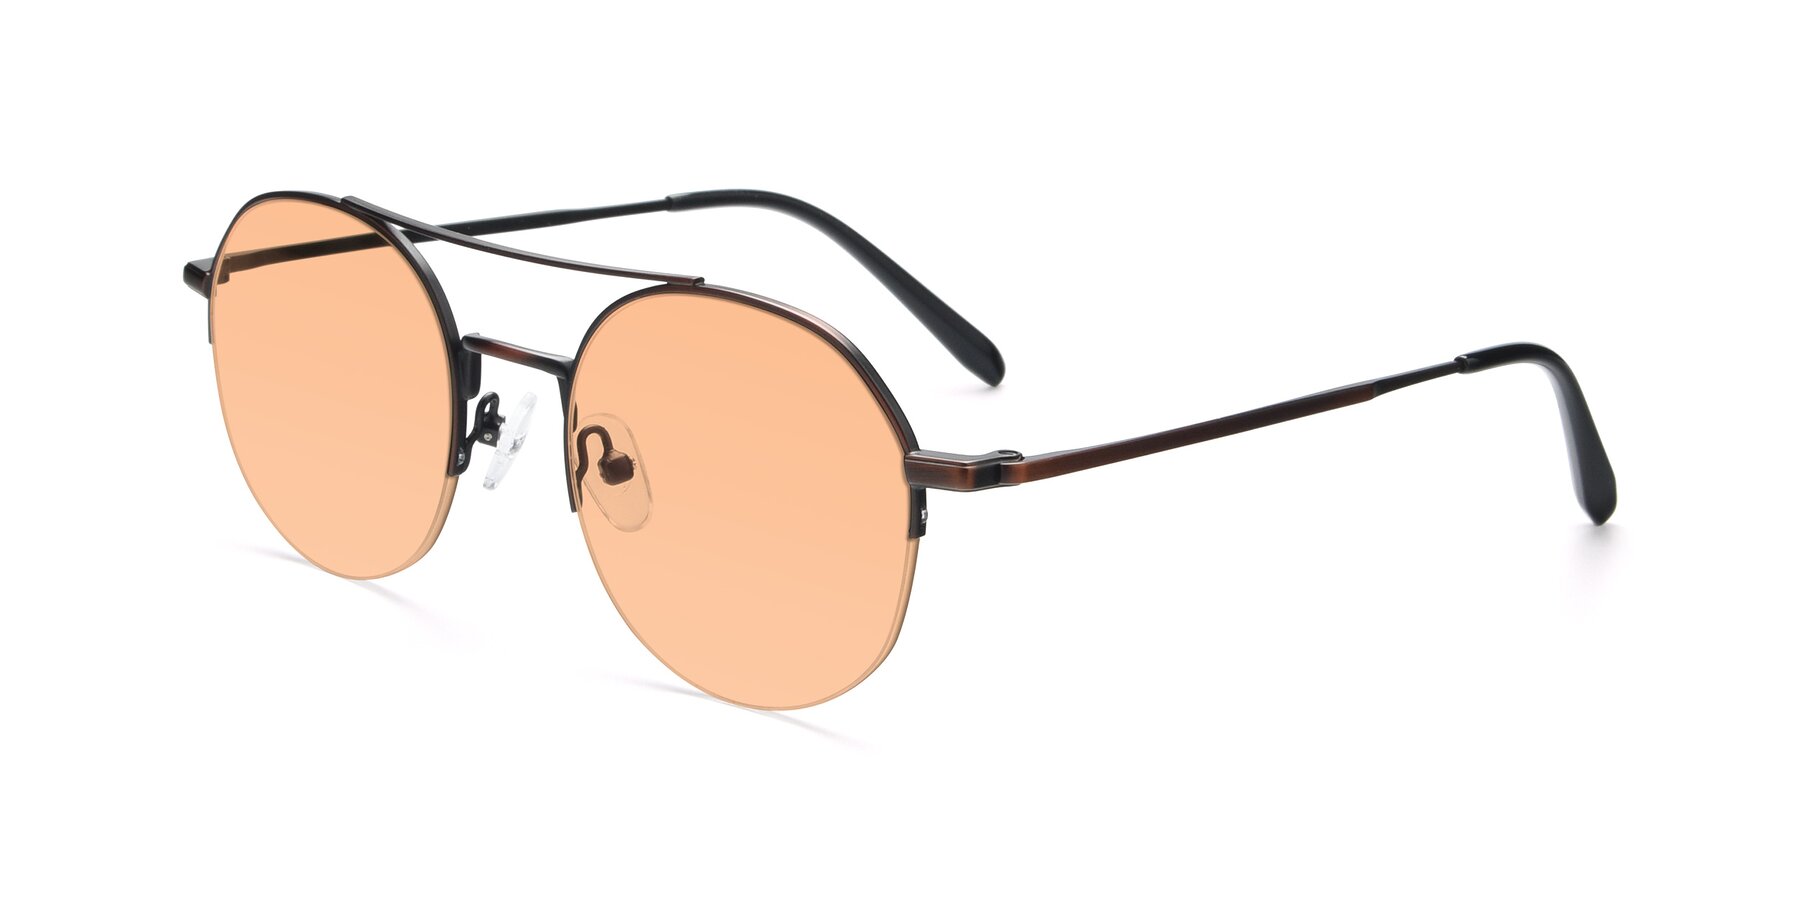 Angle of 9521 in Brown with Light Orange Tinted Lenses